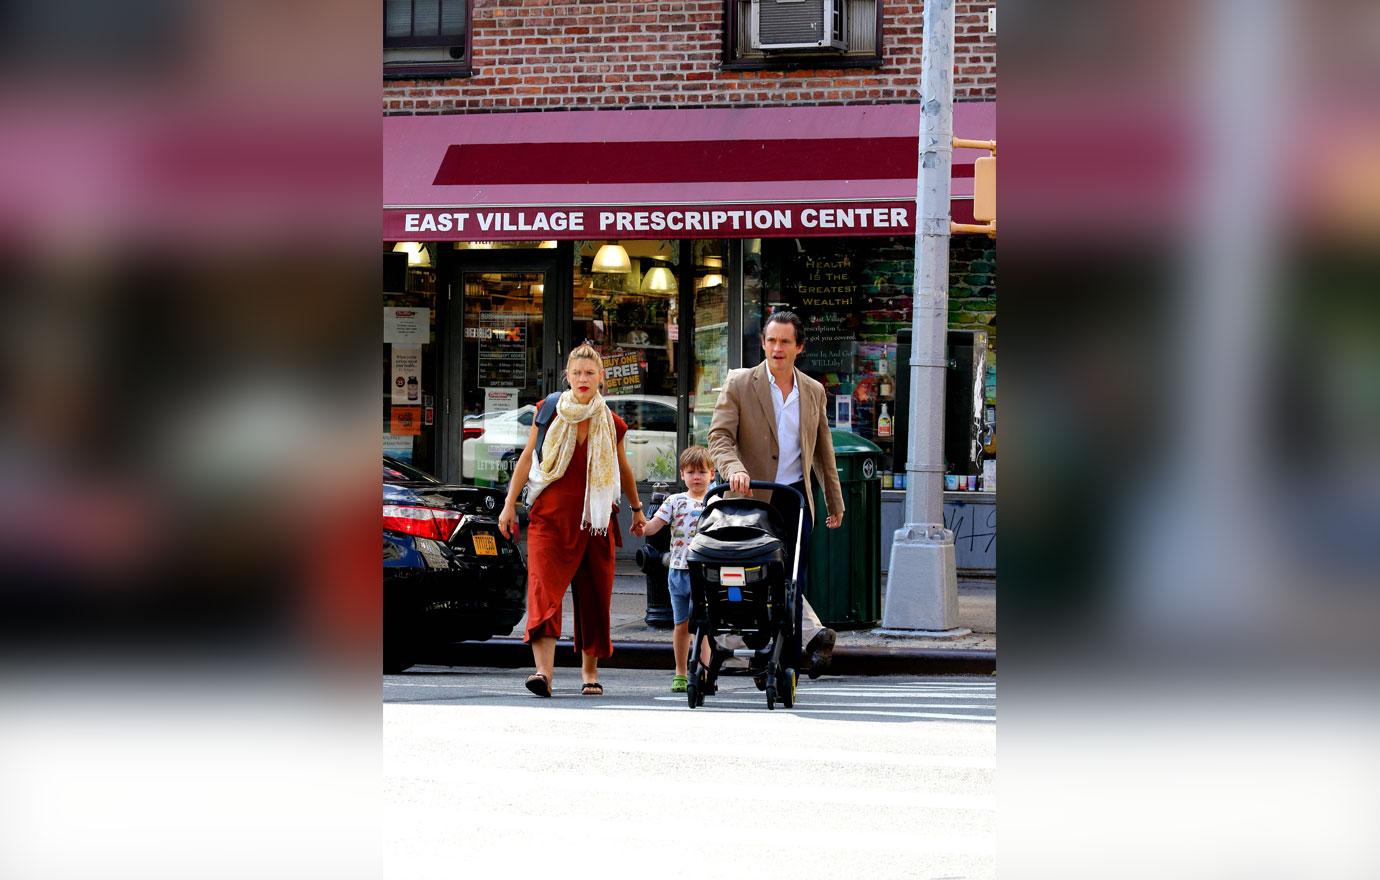 Claire Danes steps out after giving birth